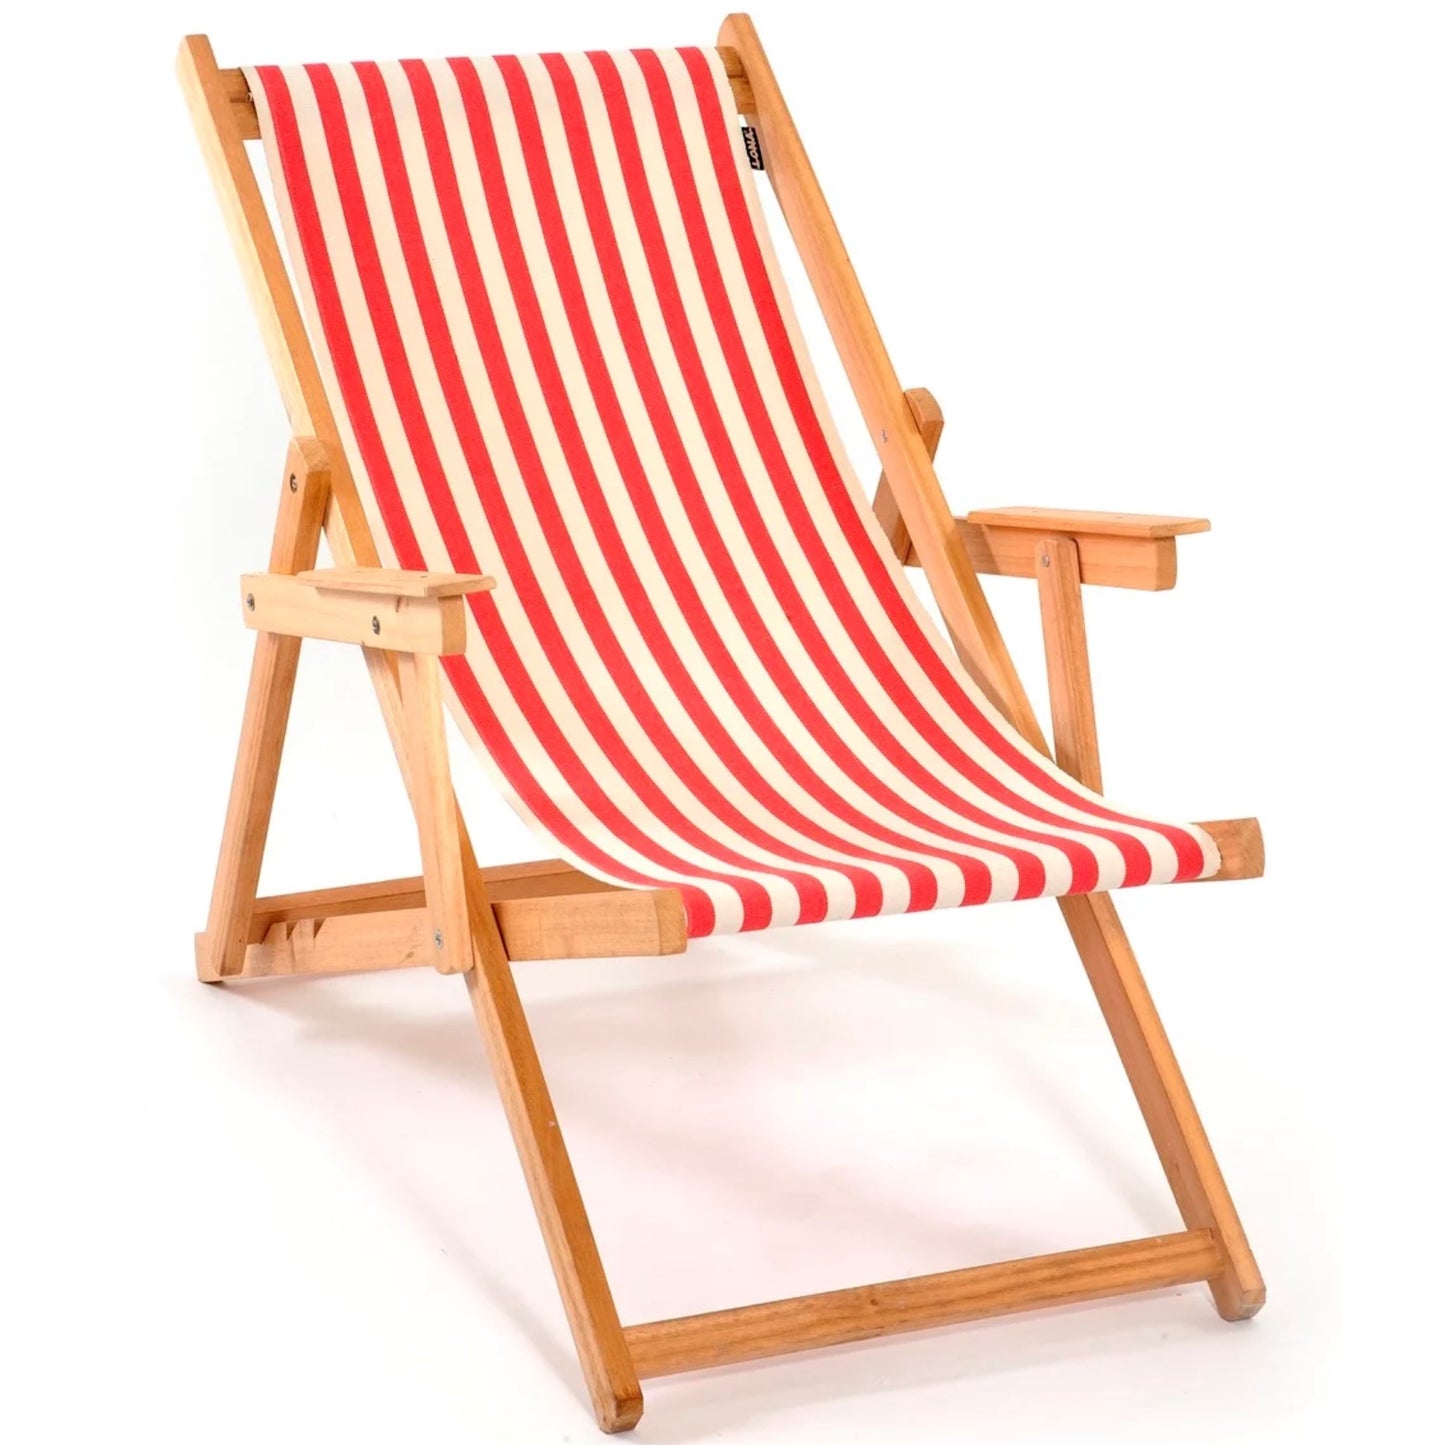 Deck chair with arms: red & white stripes